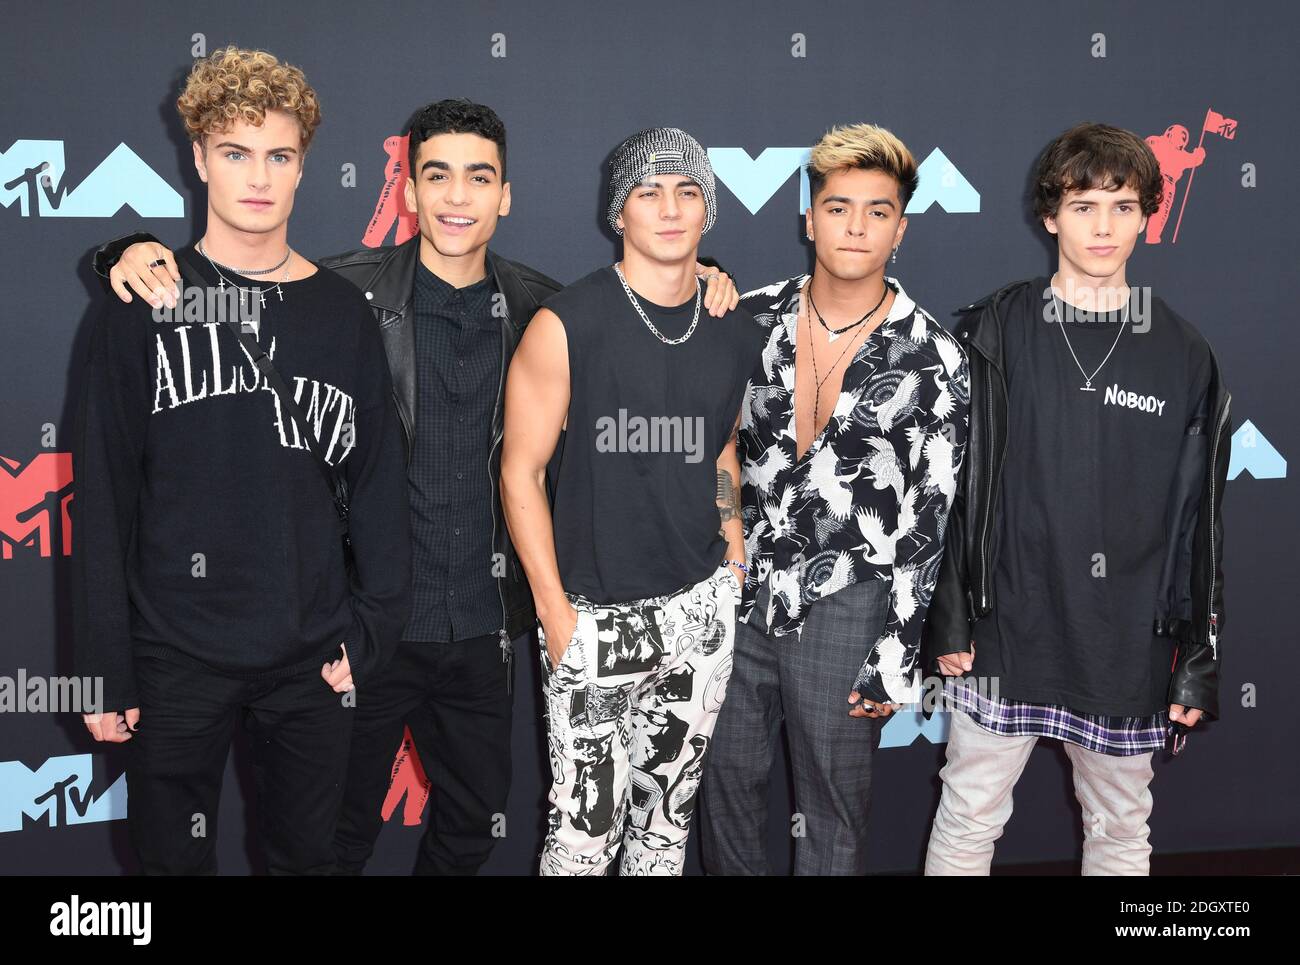 Brady Tutton, Drew Ramos, Chance Perez, Sergio Calderon and Conor Smith of the band In Real Life arriving at the MTV Video Music Awards 2019, held at the Prudential Centre in Newark, NJ. Photo credit should read: Doug Peters/EMPICS Stock Photo